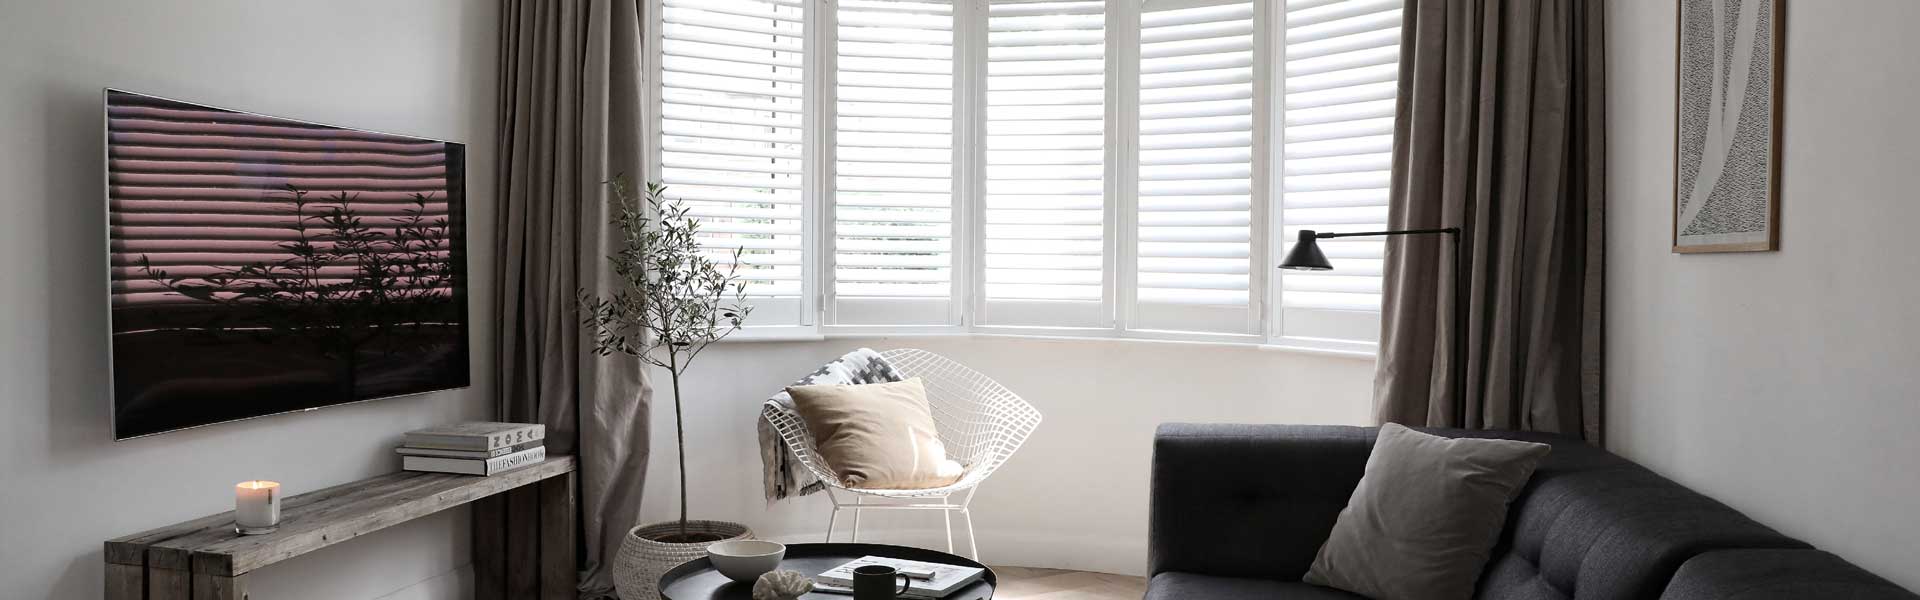 shutters and blinds bay window shutters